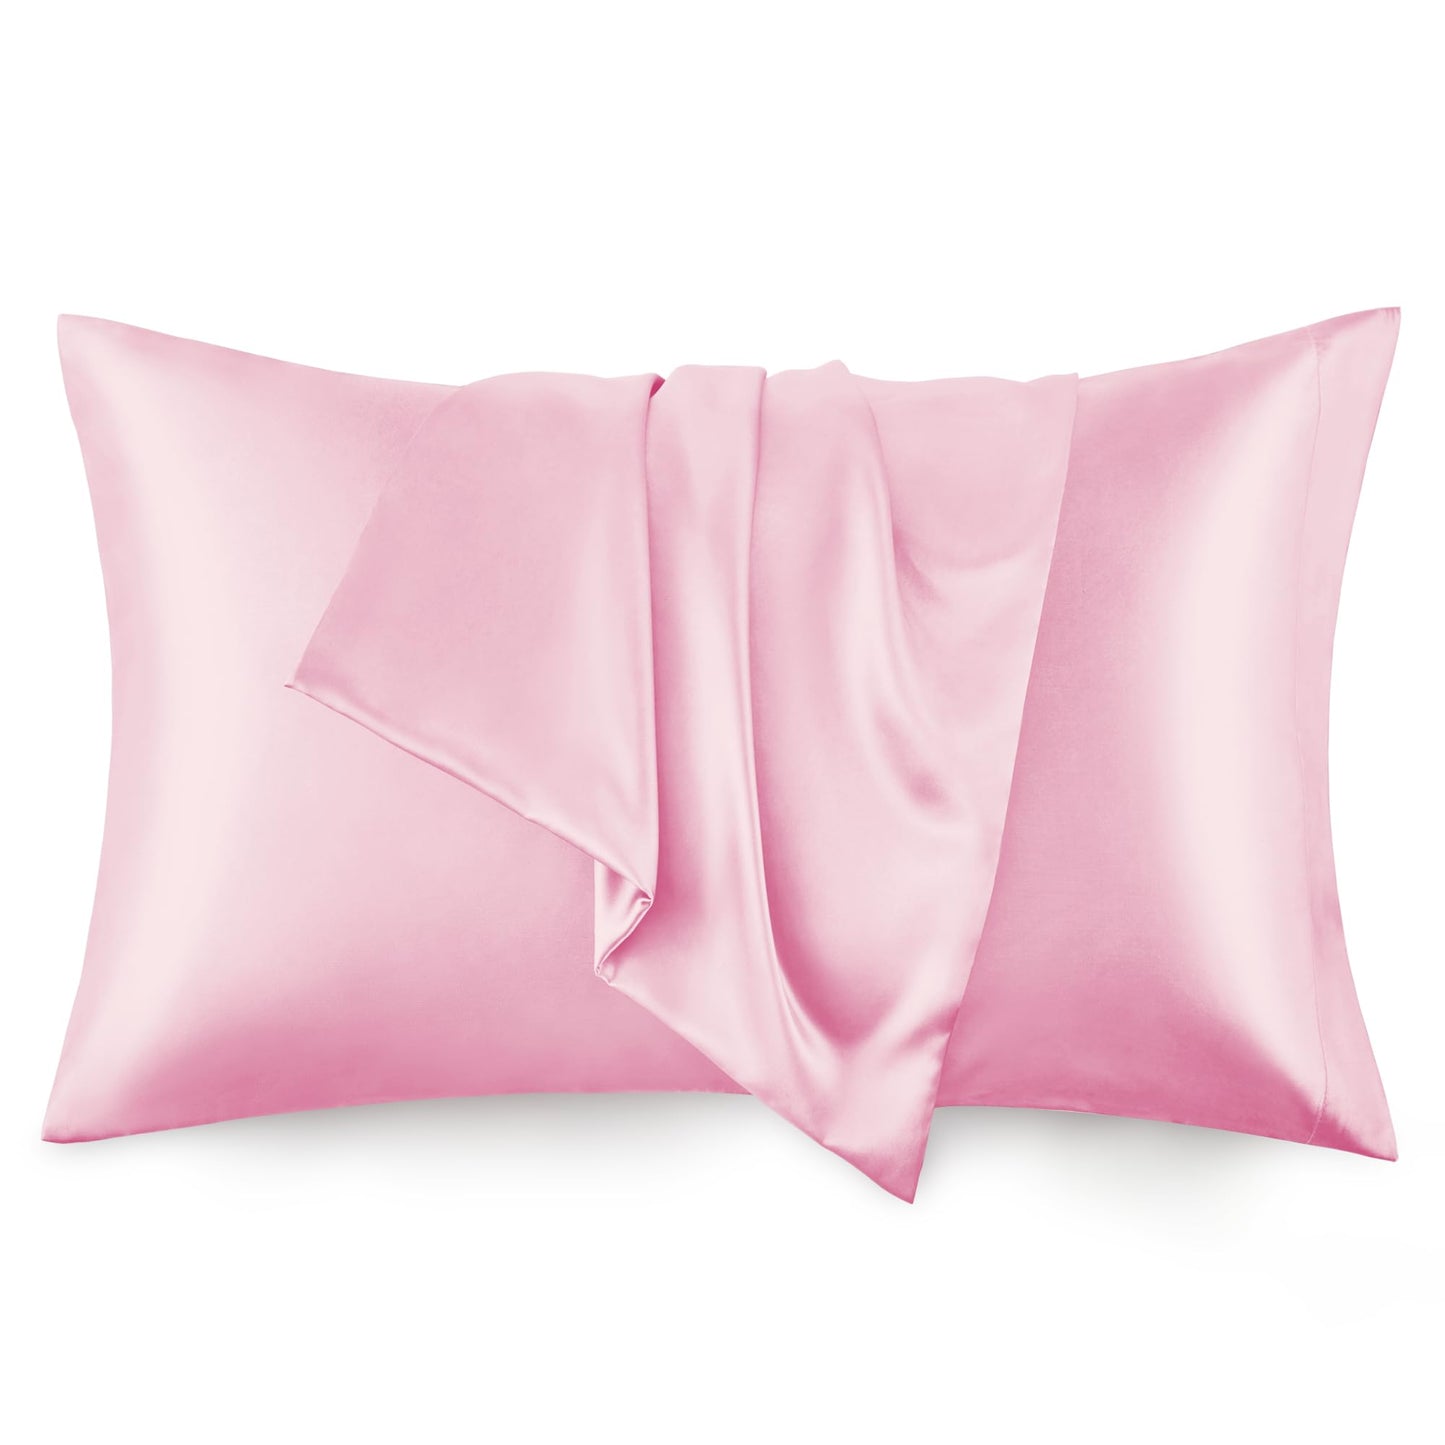 Love's cabin Silk Satin Pillowcase for Hair and Skin (Pink, 20x36 inches) Slip King Size Pillow Cases Set of 2 - Satin Cooling Pillow Covers with Envelope Closure